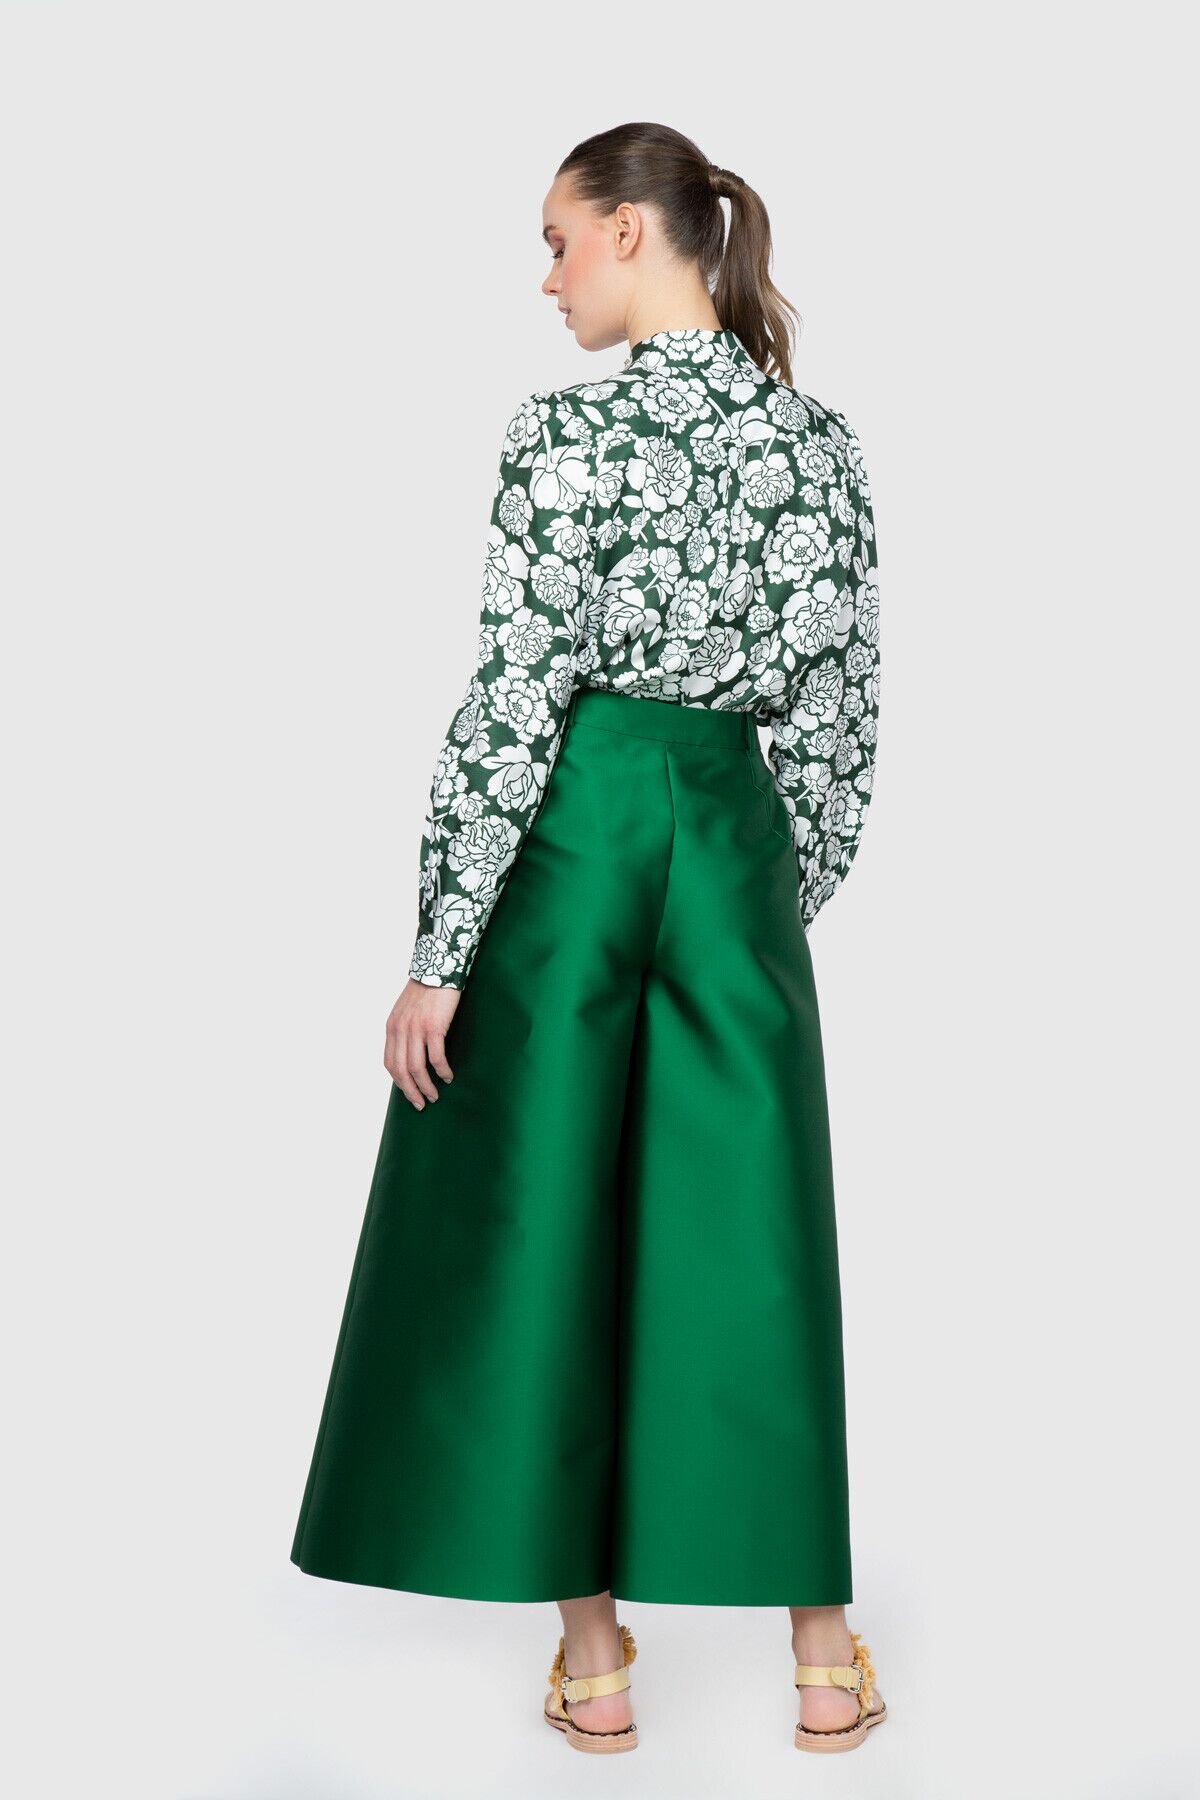 Embroidered Collar Detailed Patterned Green Blouse